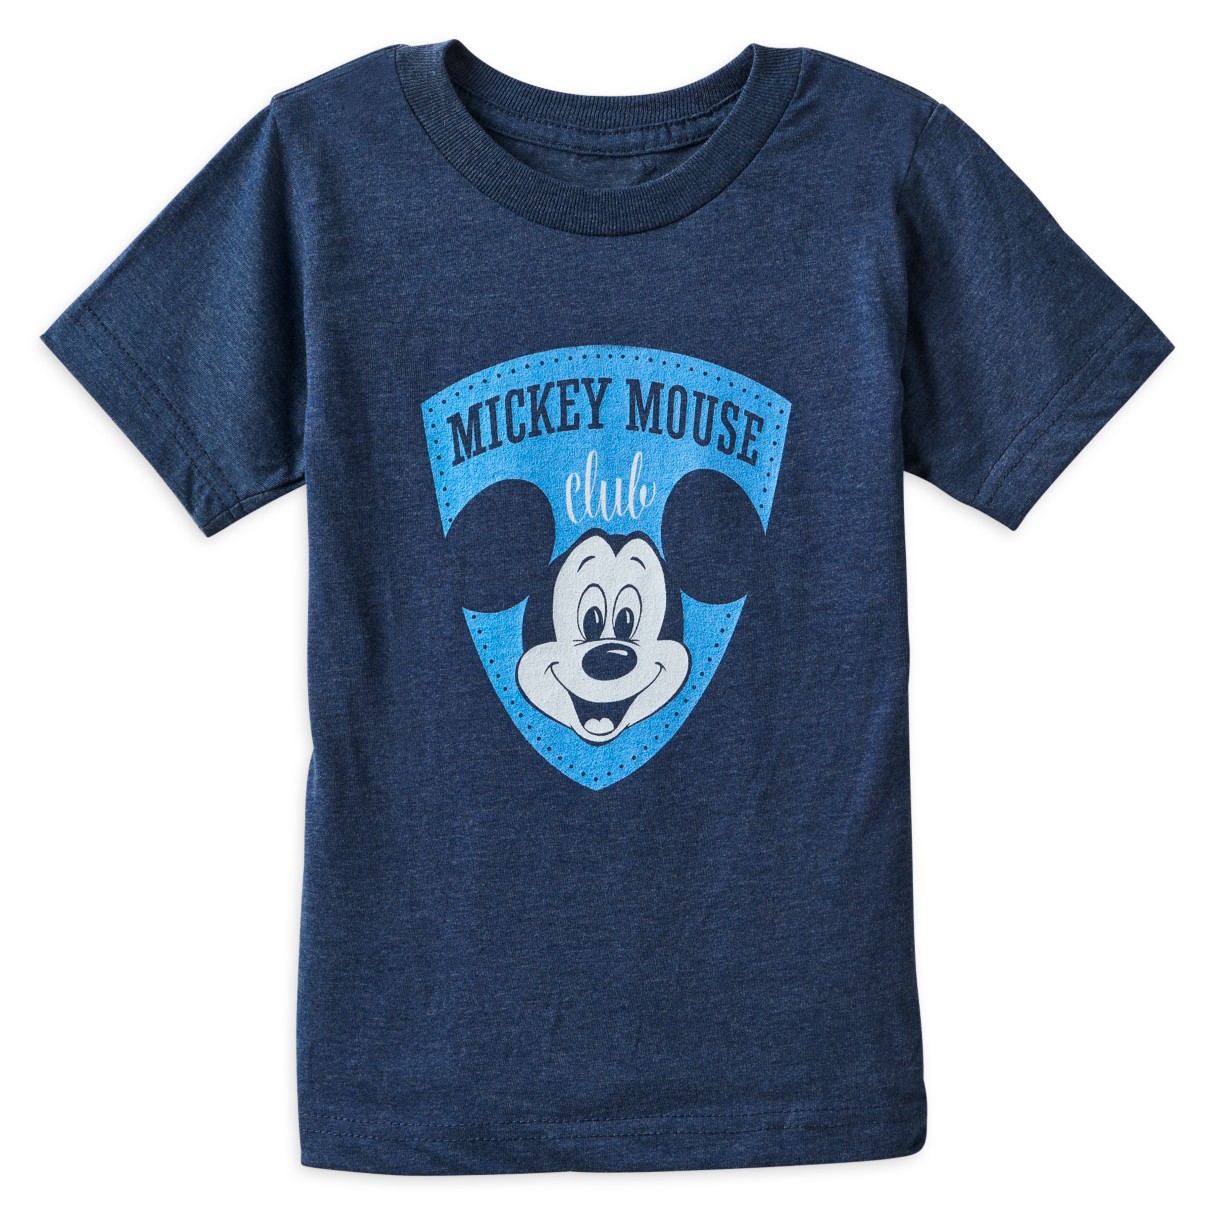 The Mickey Mouse Club Shield T-Shirt for Kids